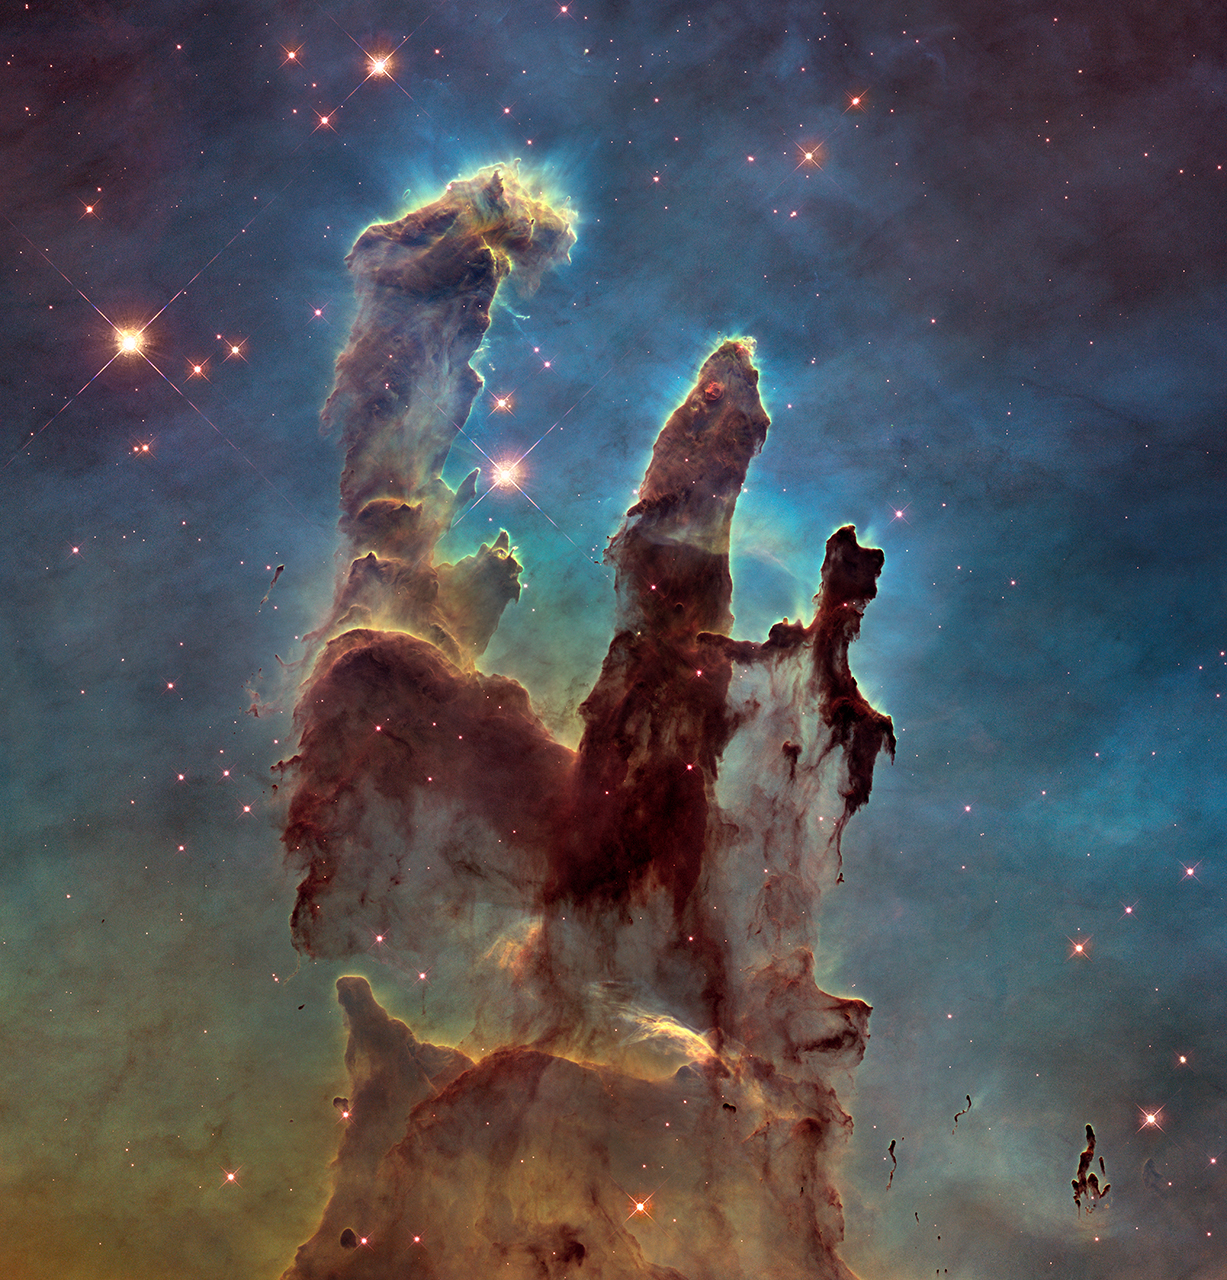 A detailed image of the Pillars of Creation, showing reddish purple dust clouds on a greenish-black background.